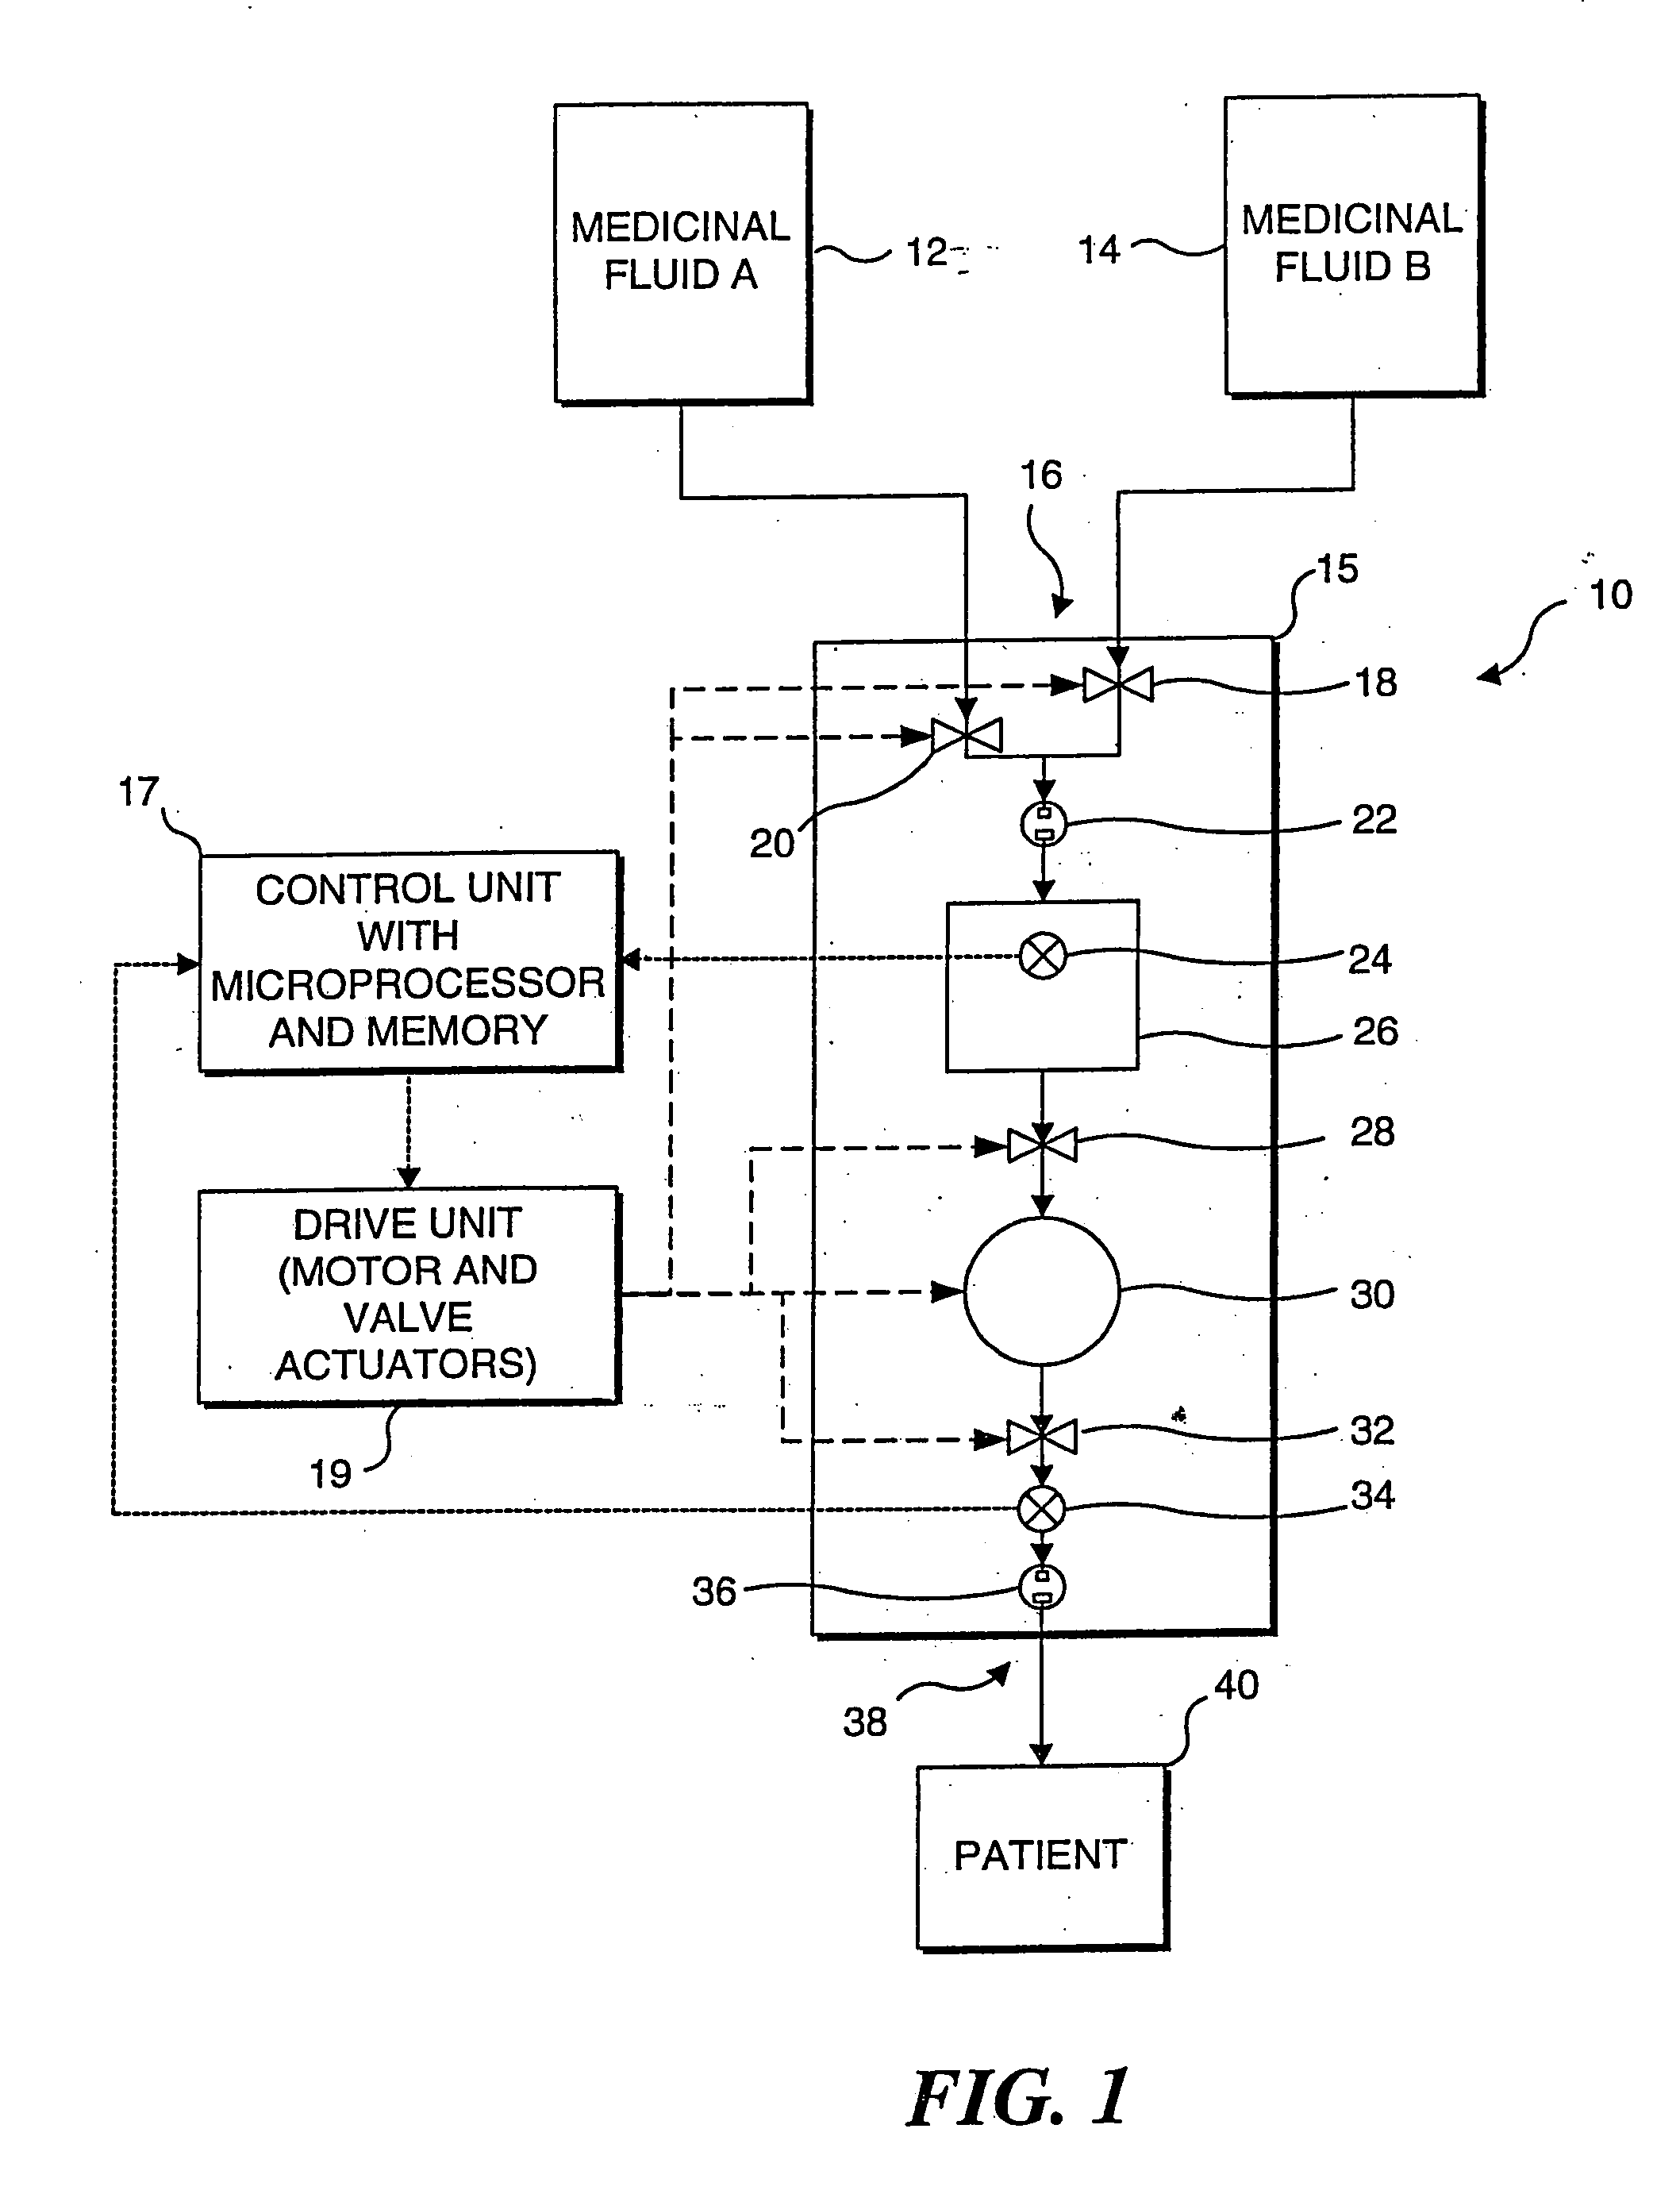 Methods for compensating for pressure differences across valves in IV pumps